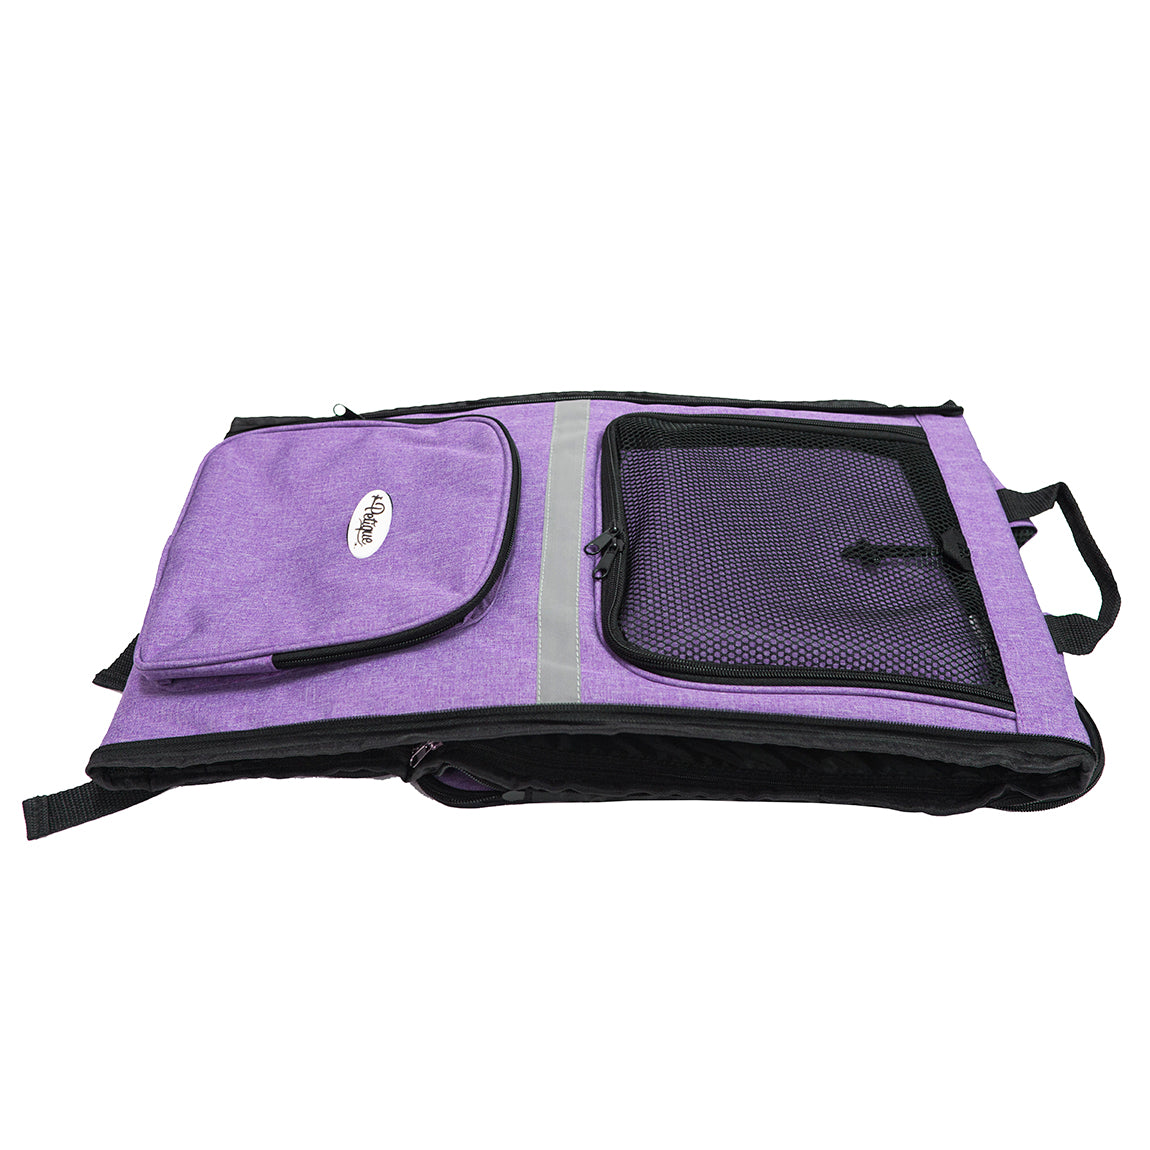 Petique The Backpacker Pet Carrier for Dogs, Cats, Small Animals ...